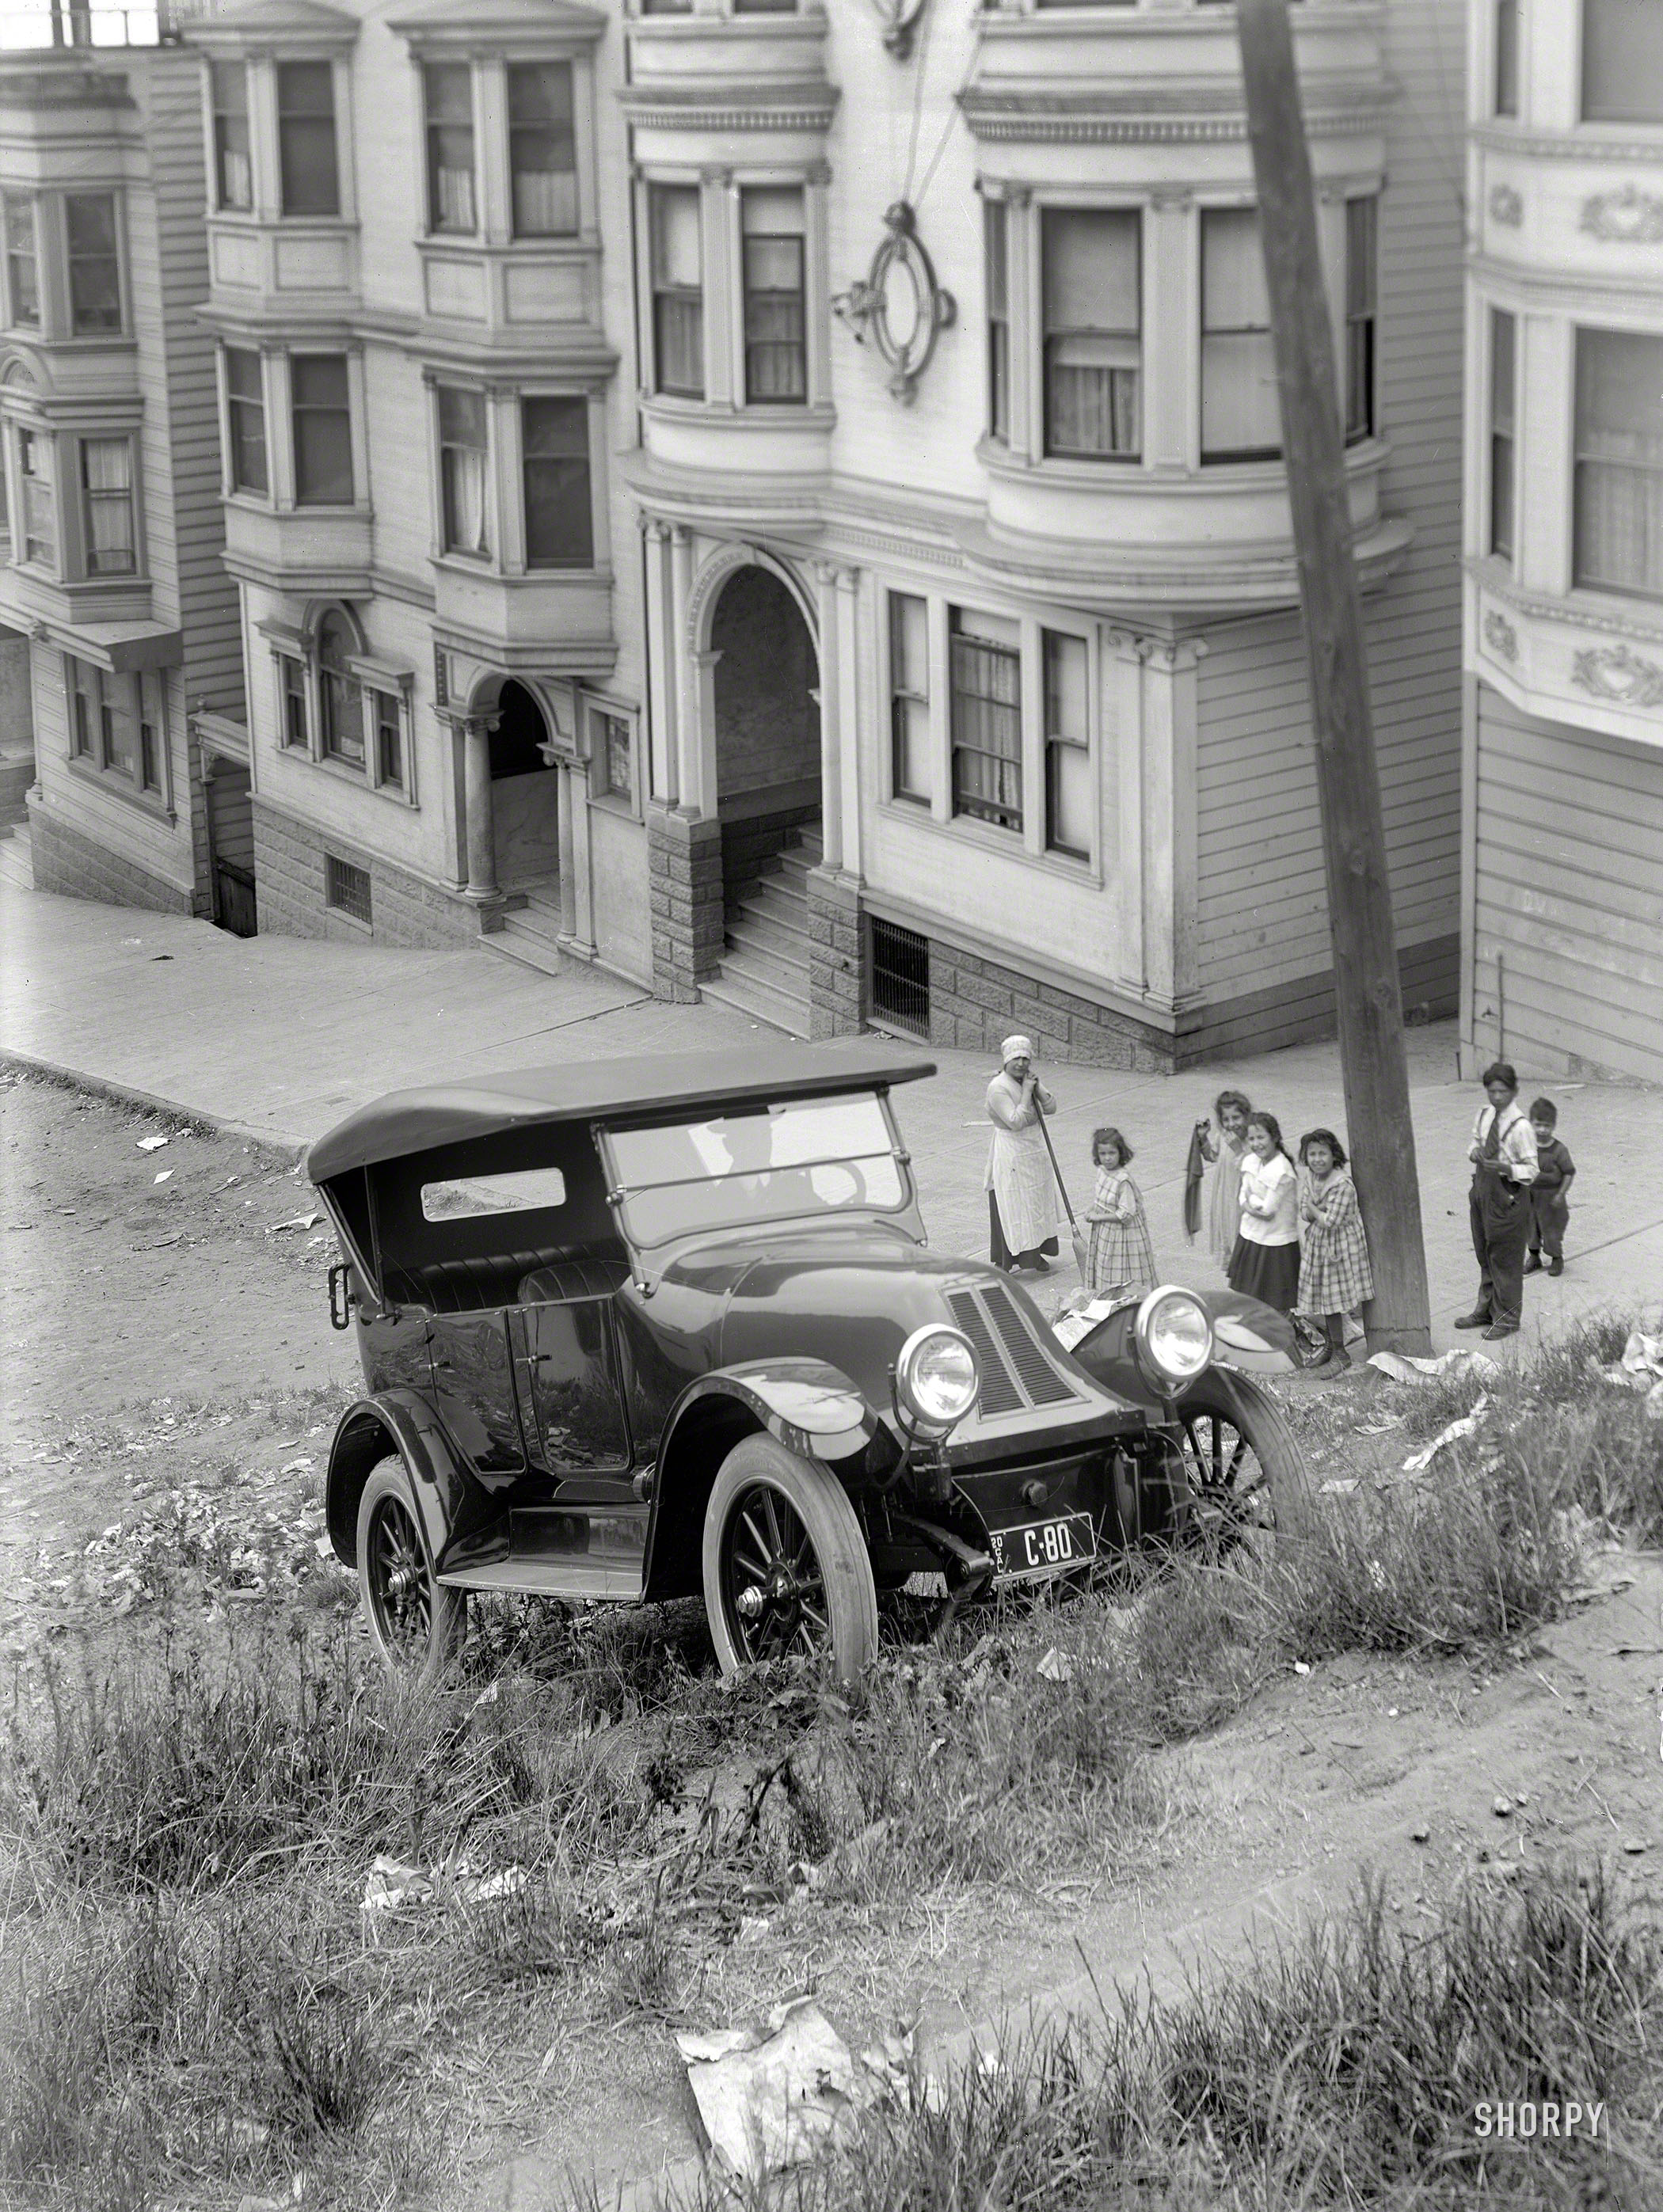 San Francisco circa 1920. "Franklin car ascending steep grade." Bonus points if you can Street View this. 8.5 x 6.5 negative by Christopher Helin. View full size.